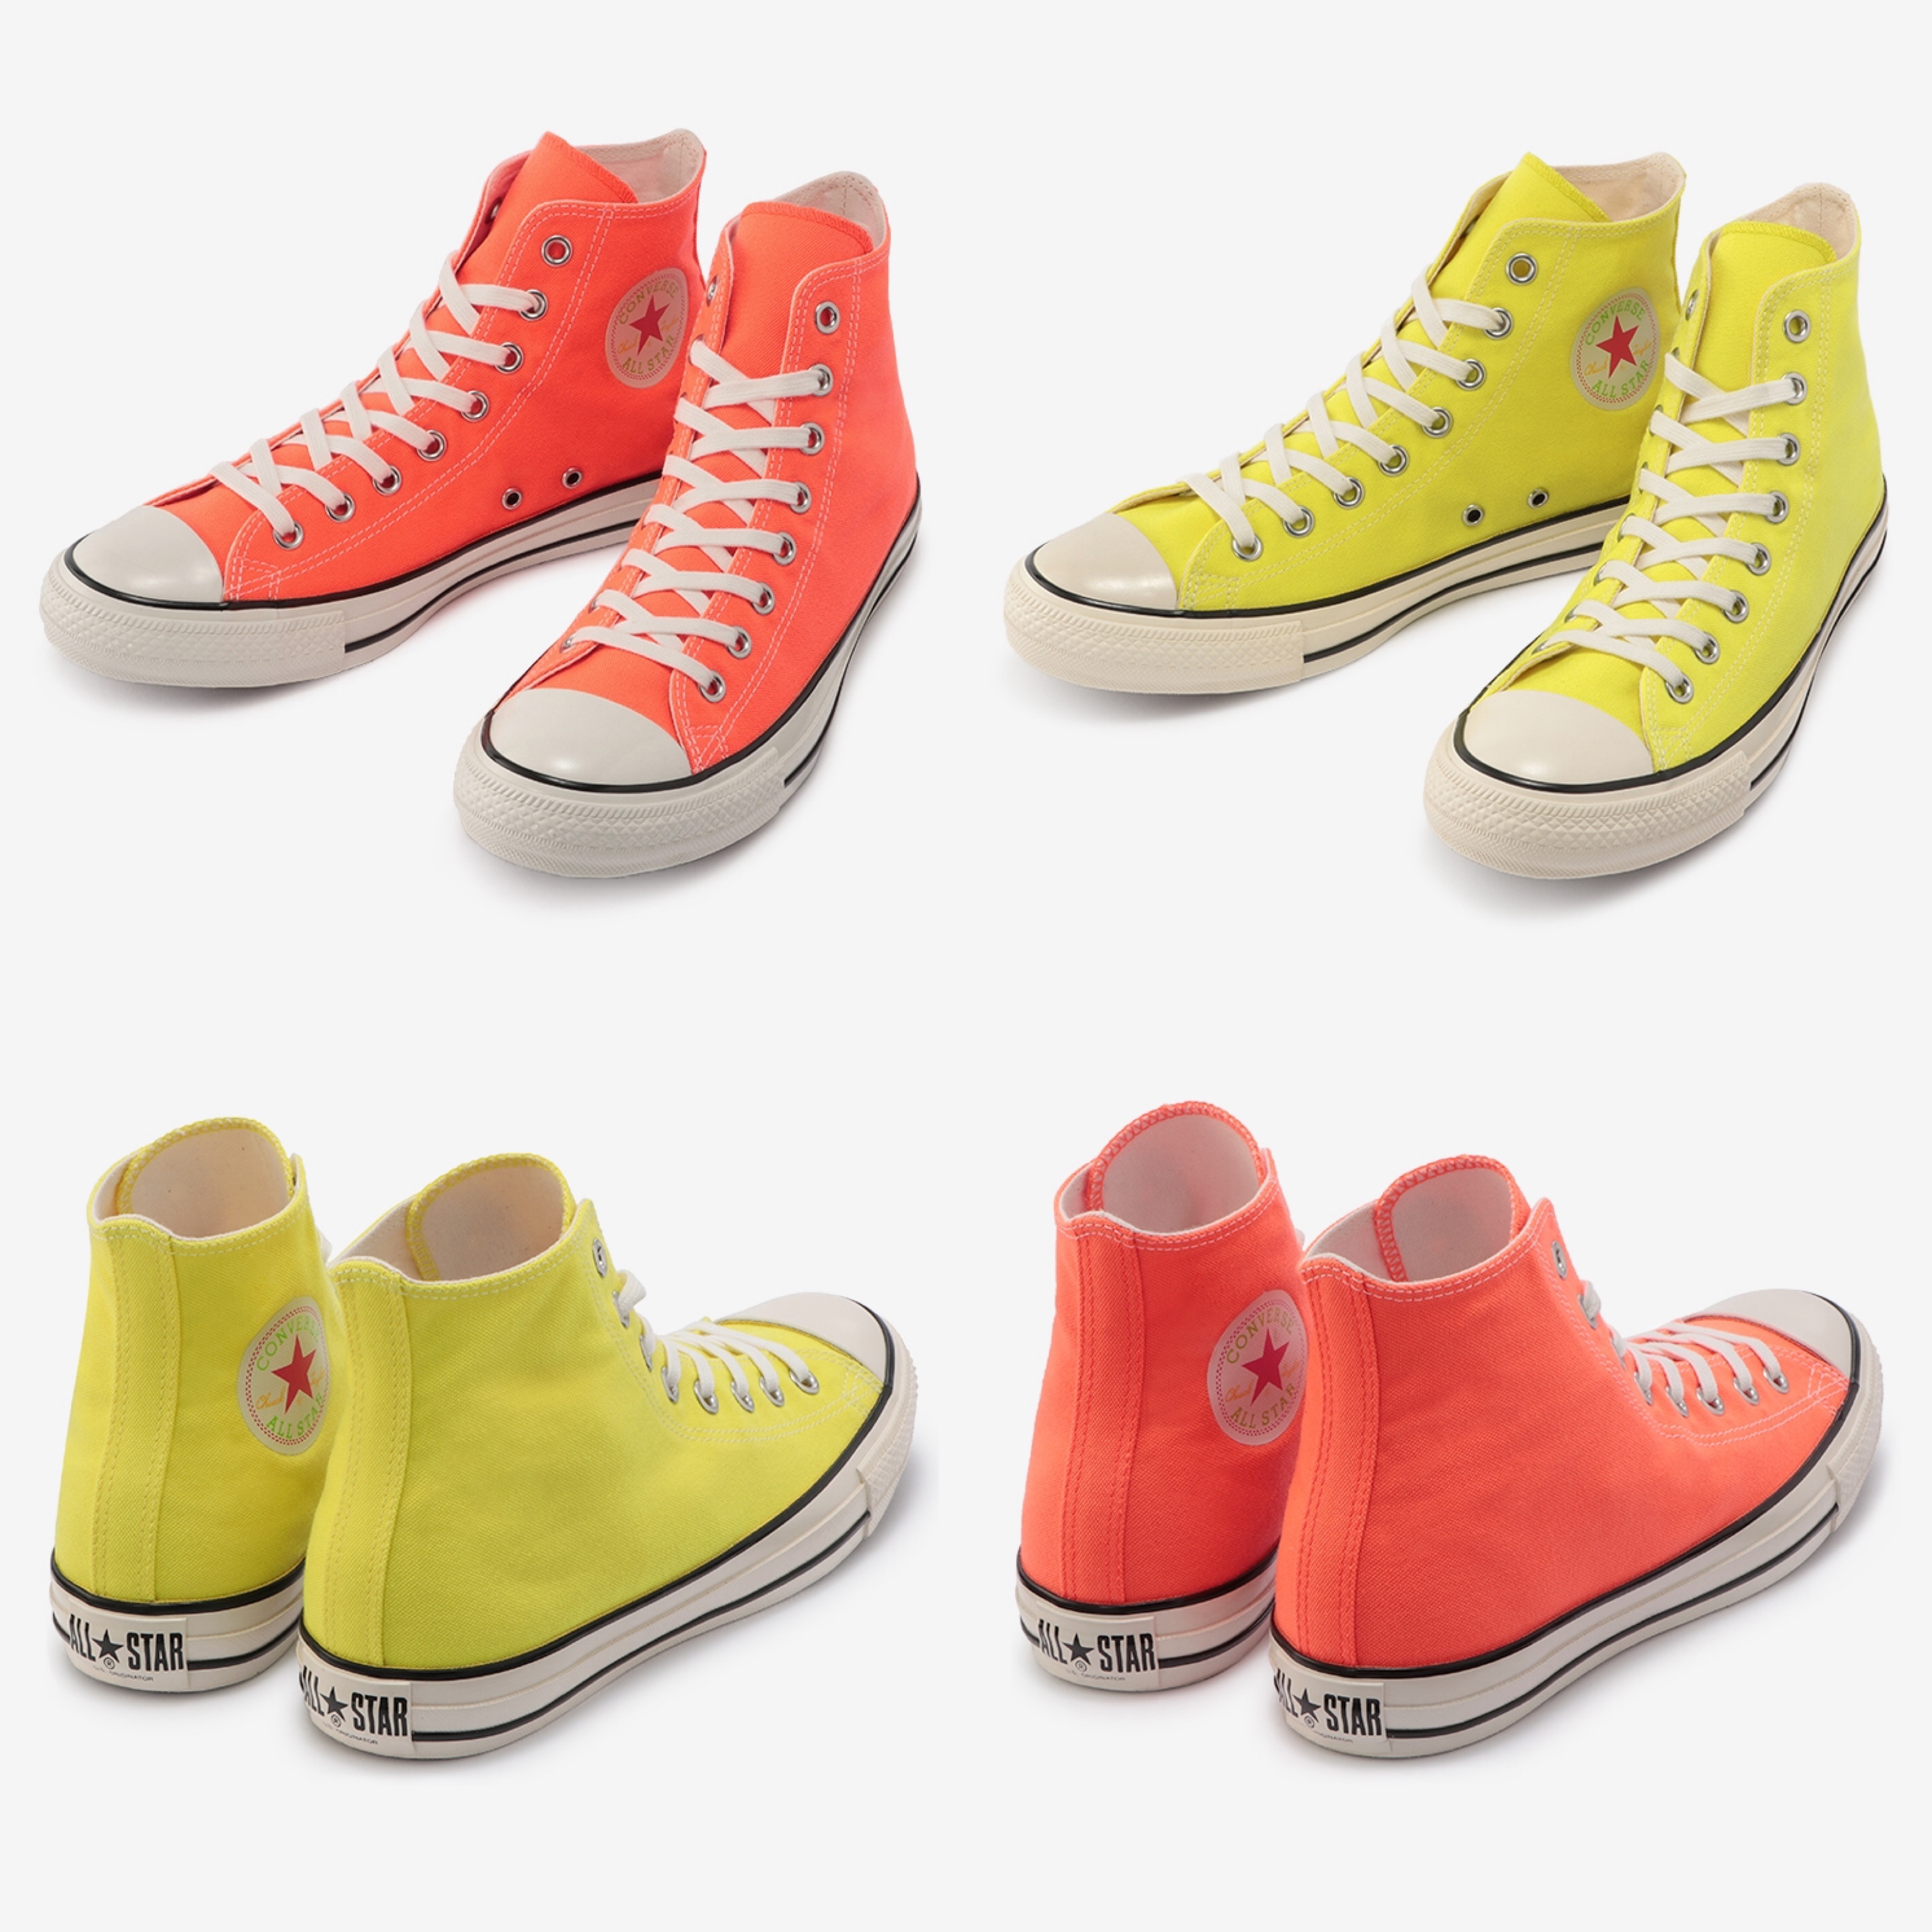 Converse ALL STAR US NEONCOLORS OF HI NEON YELLOW